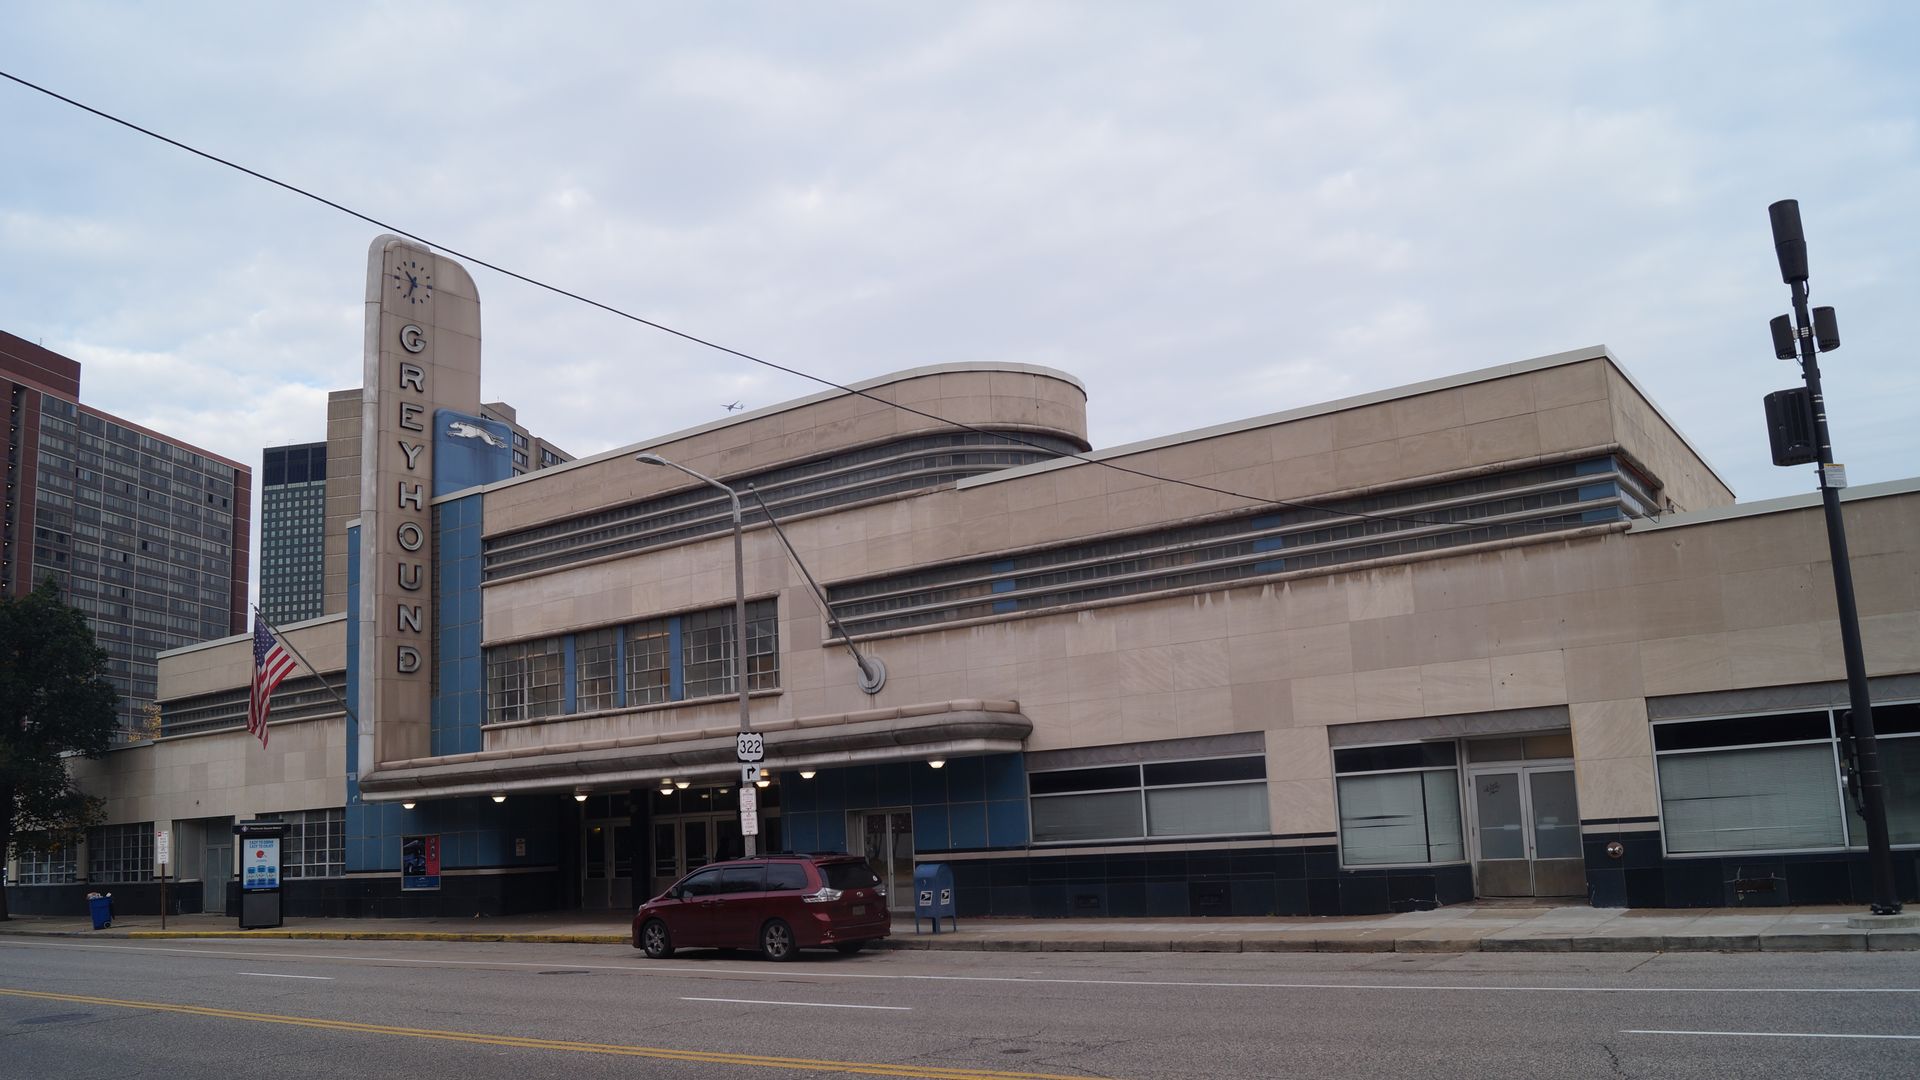 Greyhound station built in the Streamline Moderne architectural style 